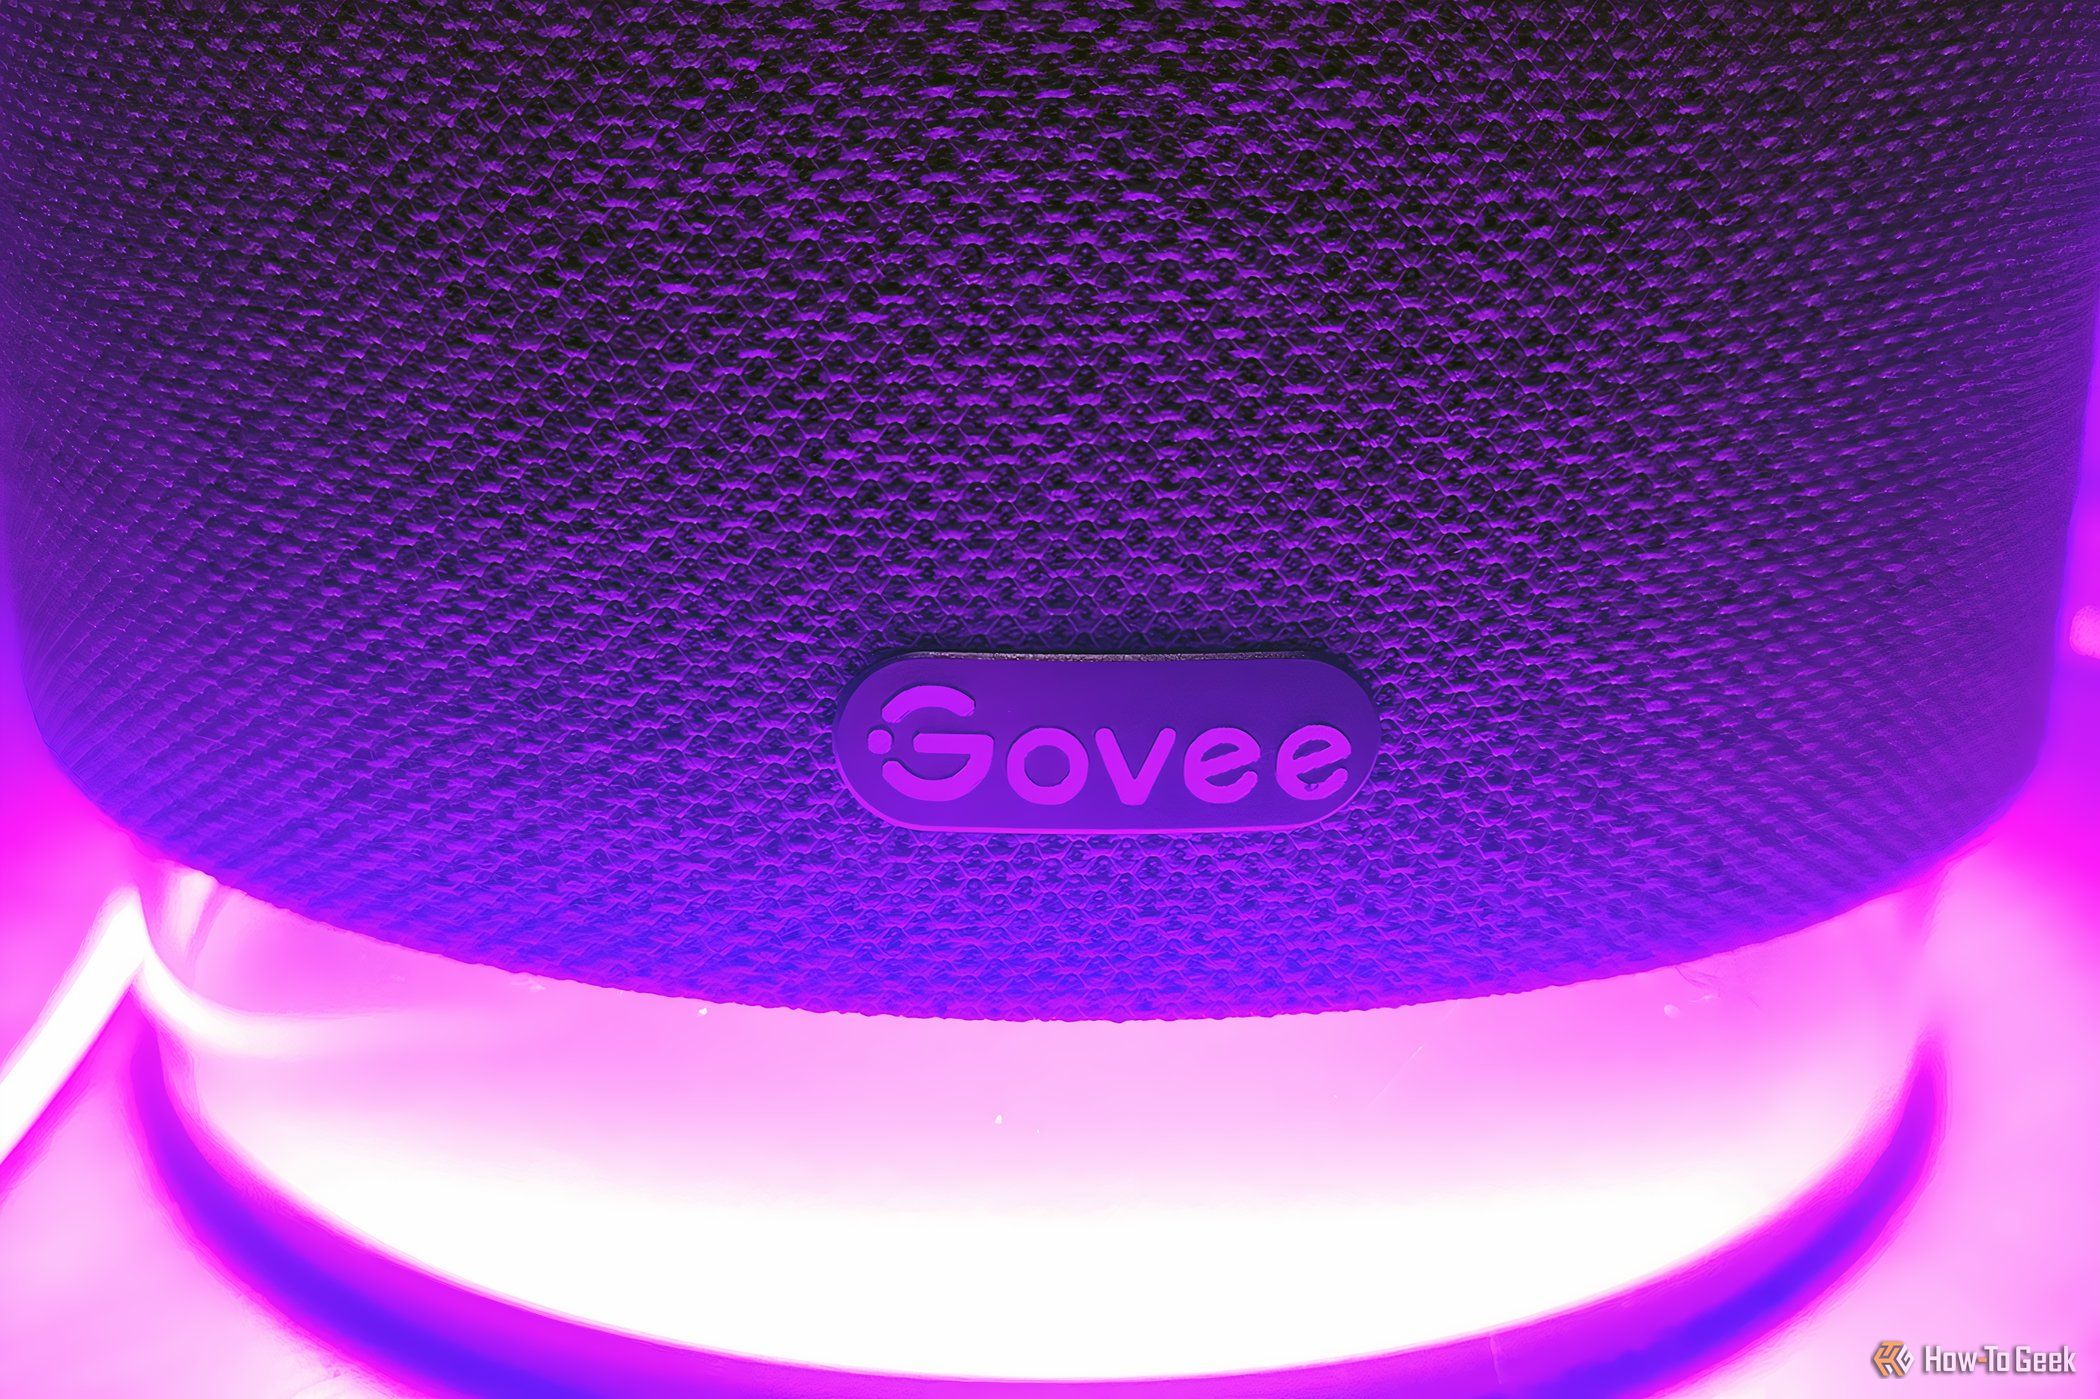 The Govee Floor Lamp Pro's Bluetooth speaker built into the base.